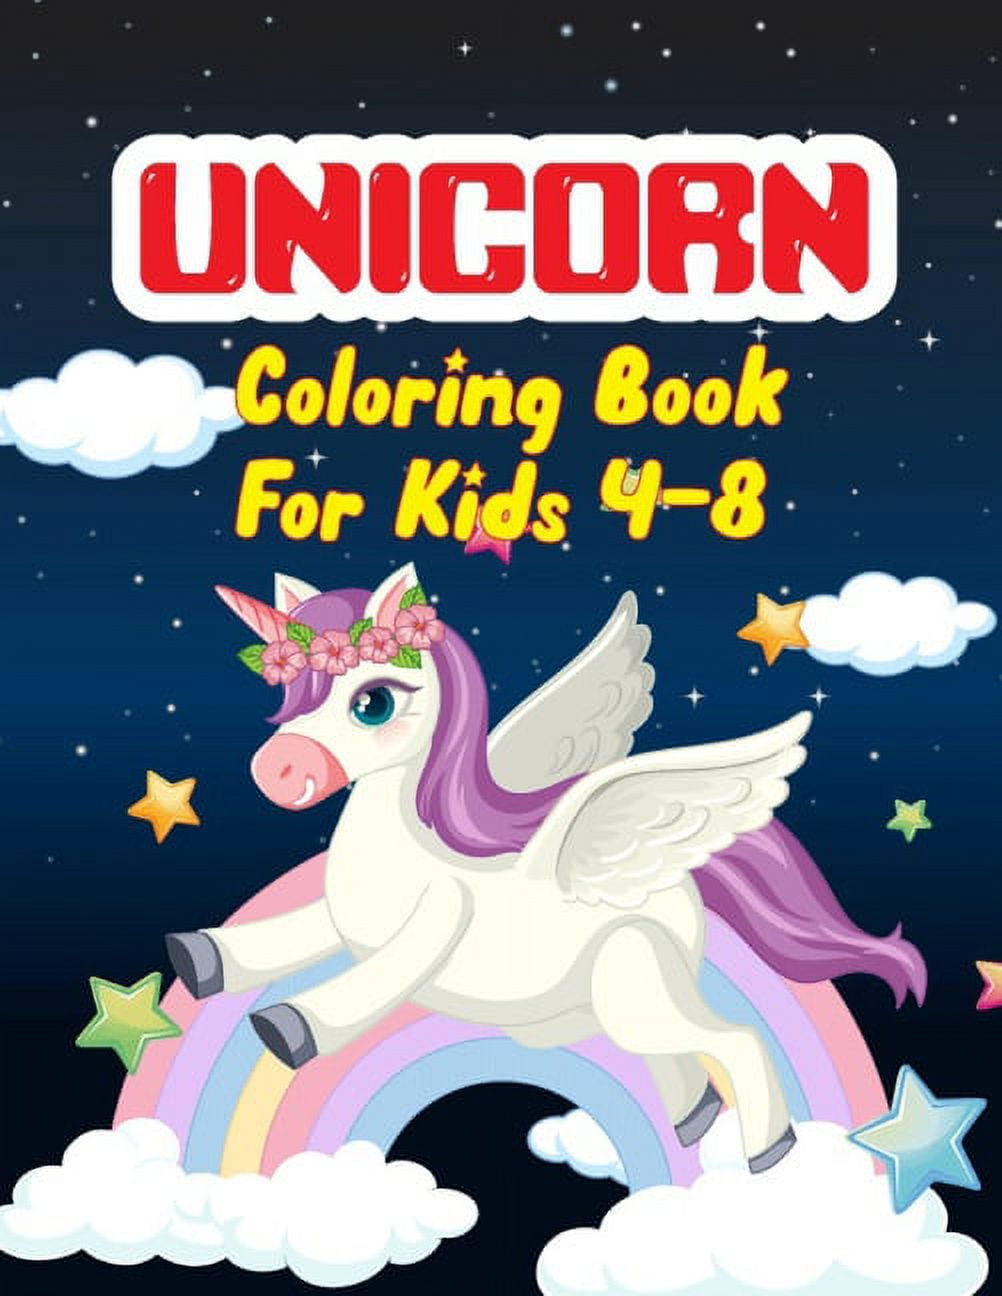 Unicorn Coloring Book For Girls Ages 8-12: Colouring Pages For Kids with  Cute and Funny Unicorns Images To Color for Children Tweens and Teenagers  4-8 (Paperback)